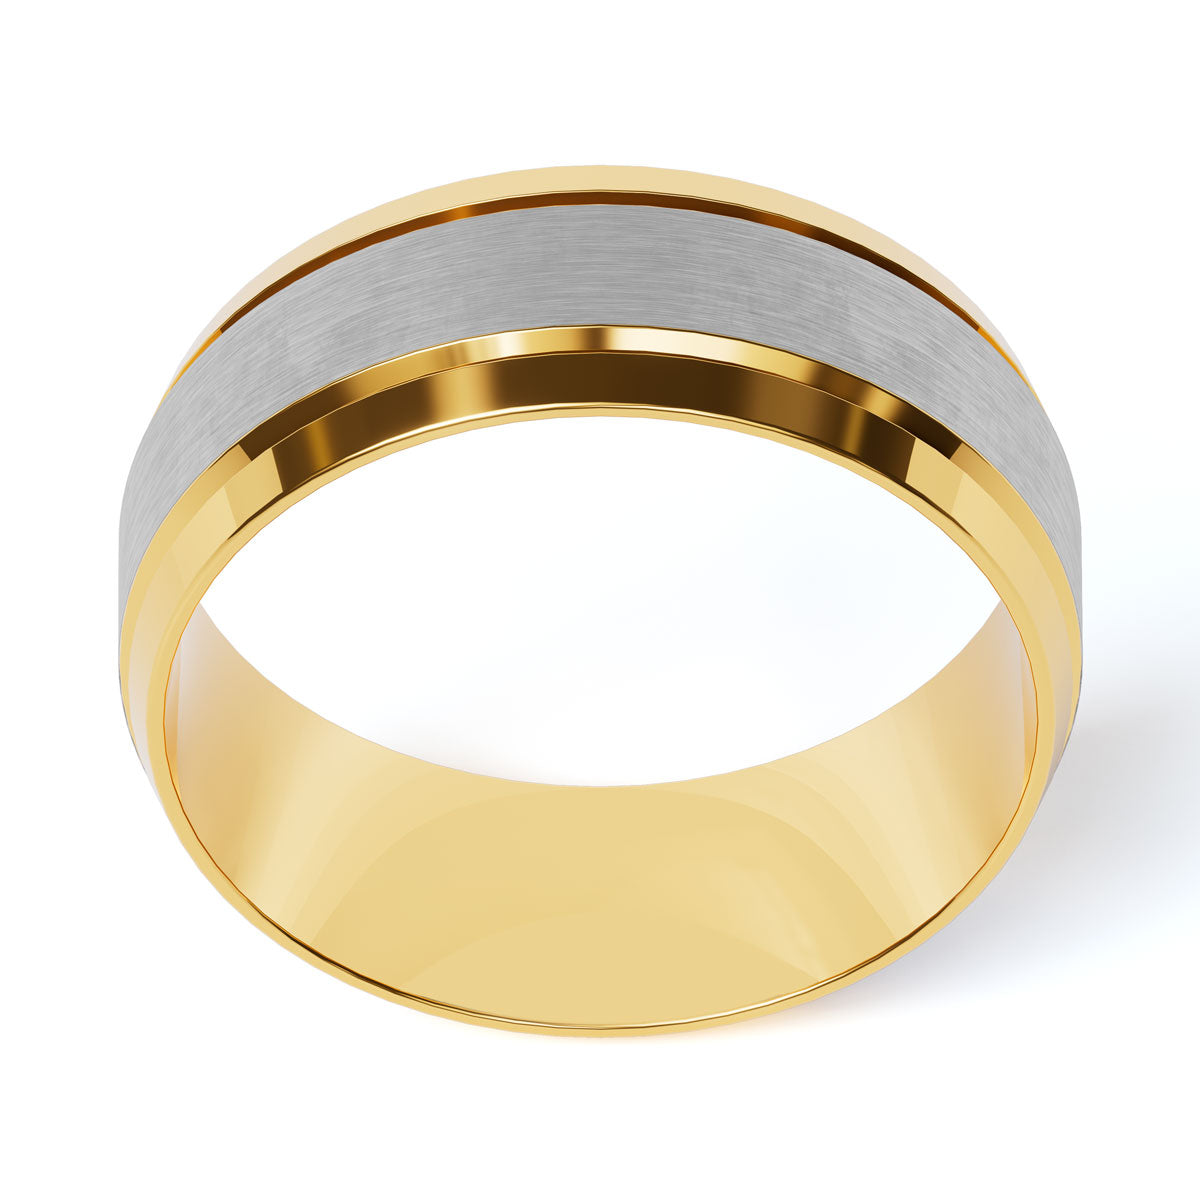 Comfort Fit 8MM Carved Beveled Wedding Band with Satin Inlay